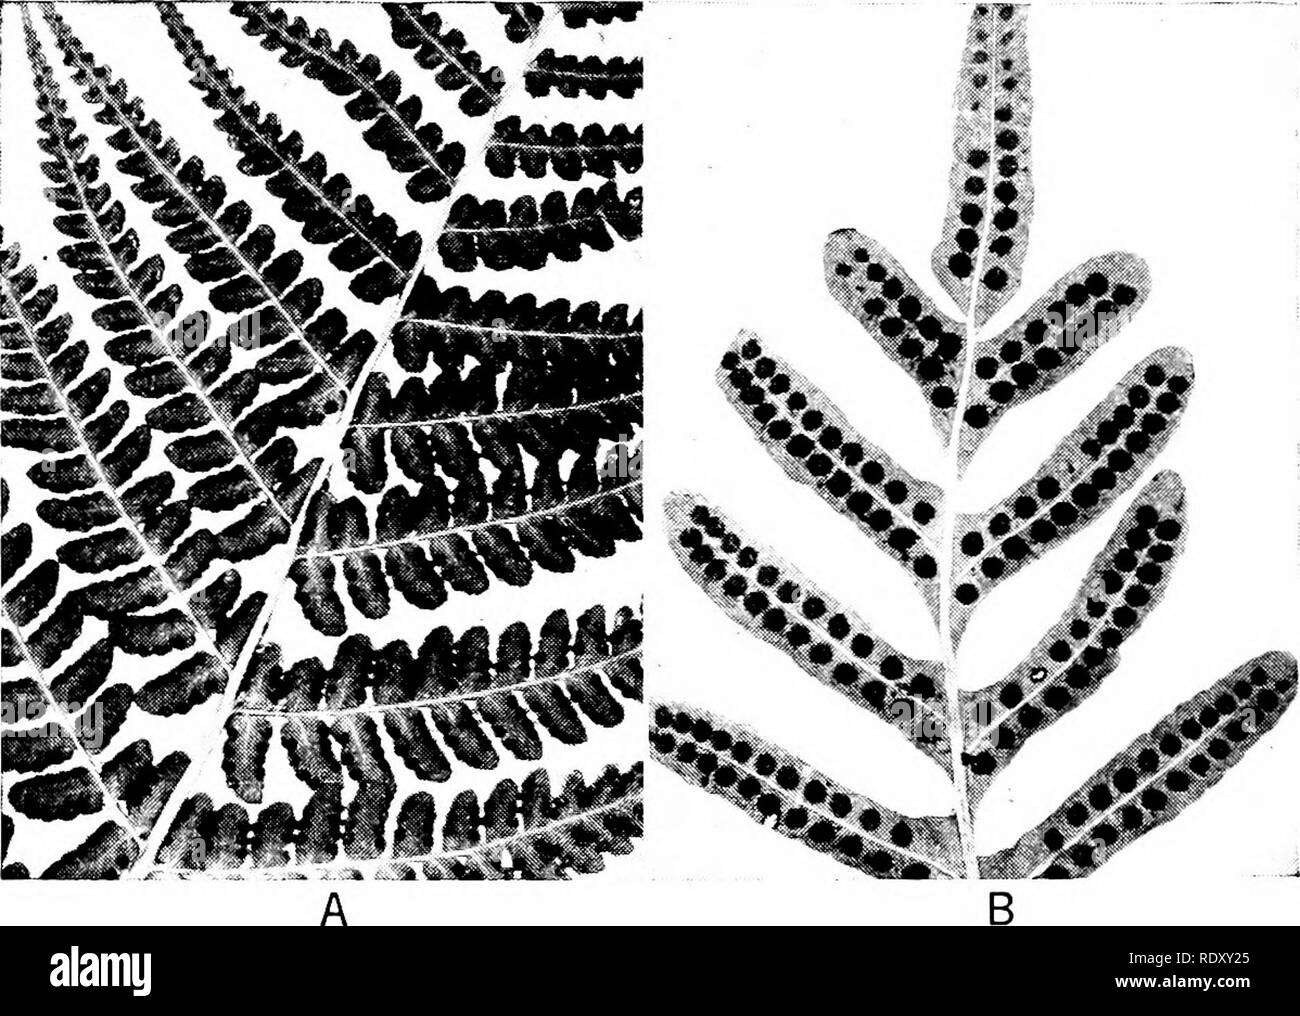 . Principles of modern biology. Biology. Fig. 12-1. The familiar fern plant is the sporophyte generation, consisting of exposed leaves (fronds), an underground stem (the rhizome), and the roots. (From The Plant World, by Fuller and Carothers. Holt, Rine- hart and Winston, Inc.) cluster of spore capsules, or sporangia. At higher magnification one can see that each sporangium is a hollow structure, containing numerous spores (Fig. 12-3). While a spo- rangium is ripening, the spores are produced from spore mother cells, or sporocytes. The spore mother cell undergoes meiosis, giving rise to four h Stock Photo